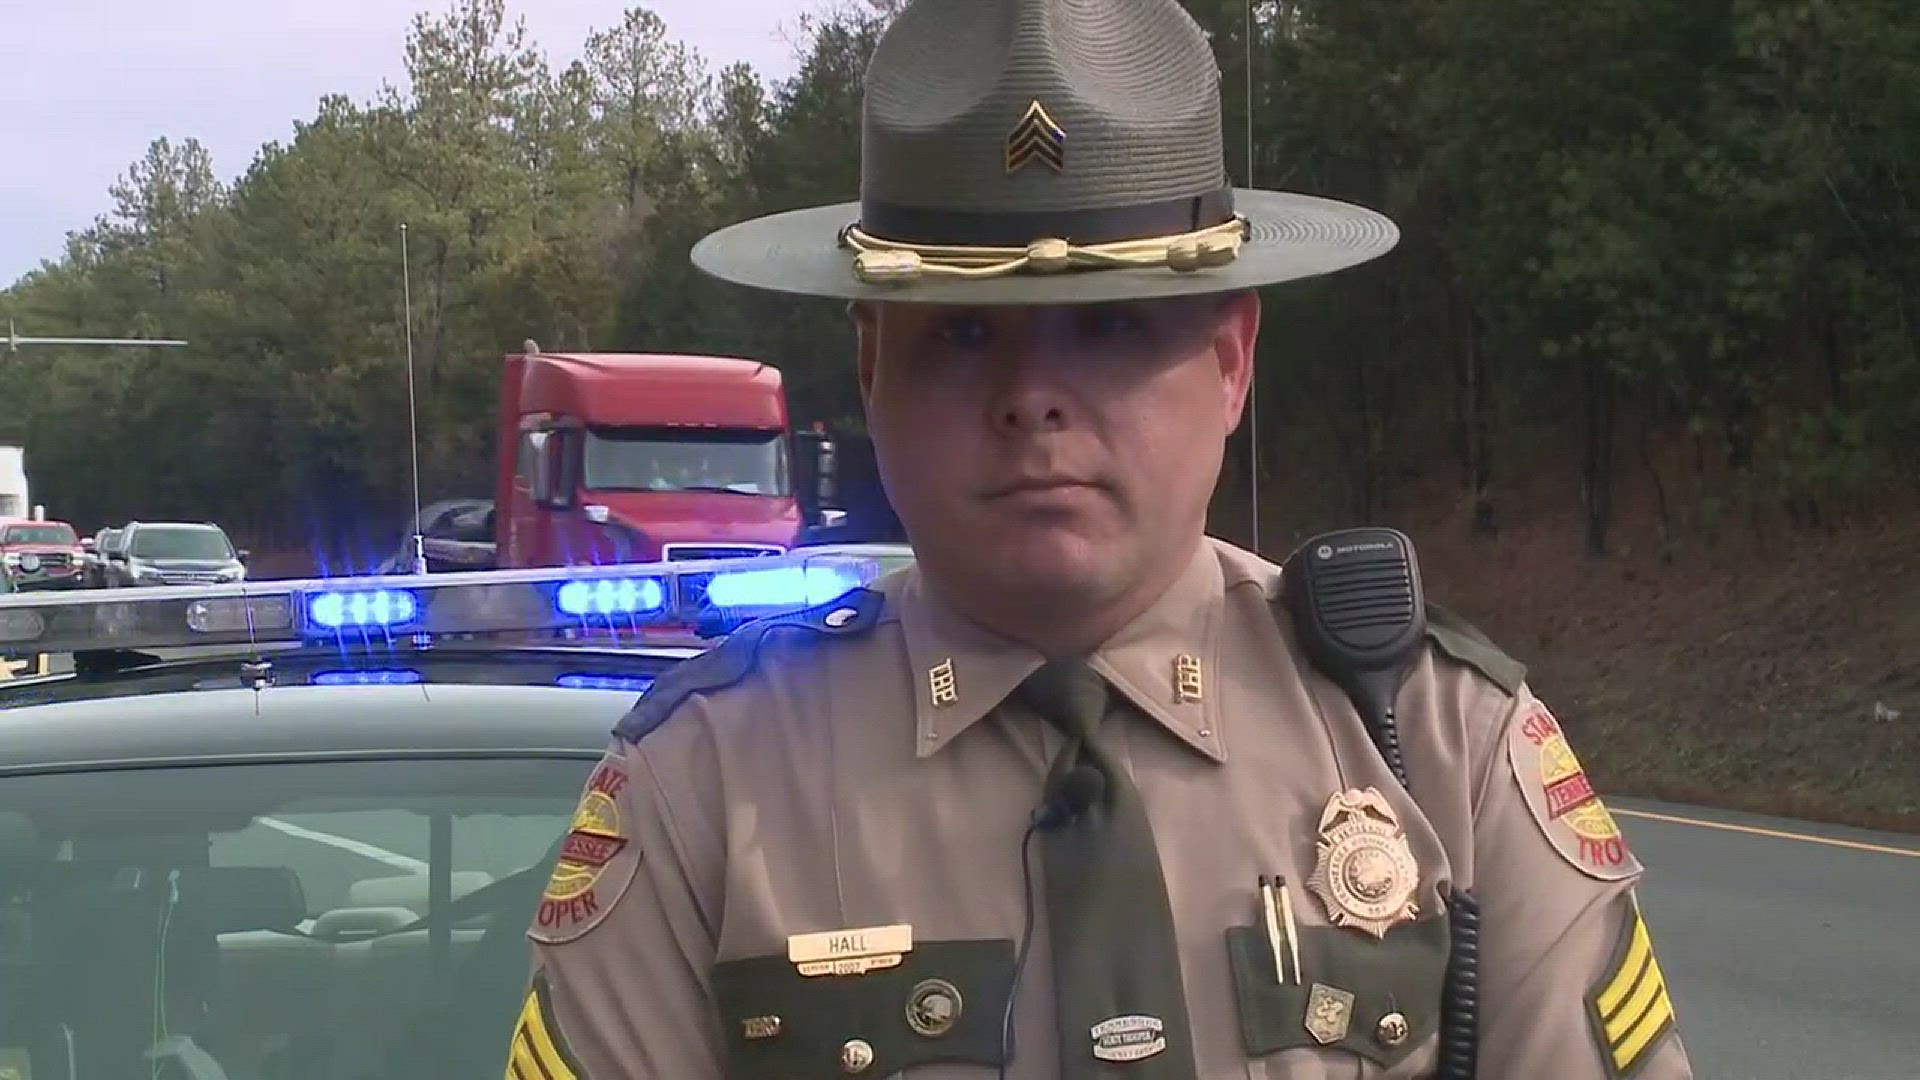 THP troopers arrested a 19-year-old man wanted in Texas and Virginia for multiple homicides.